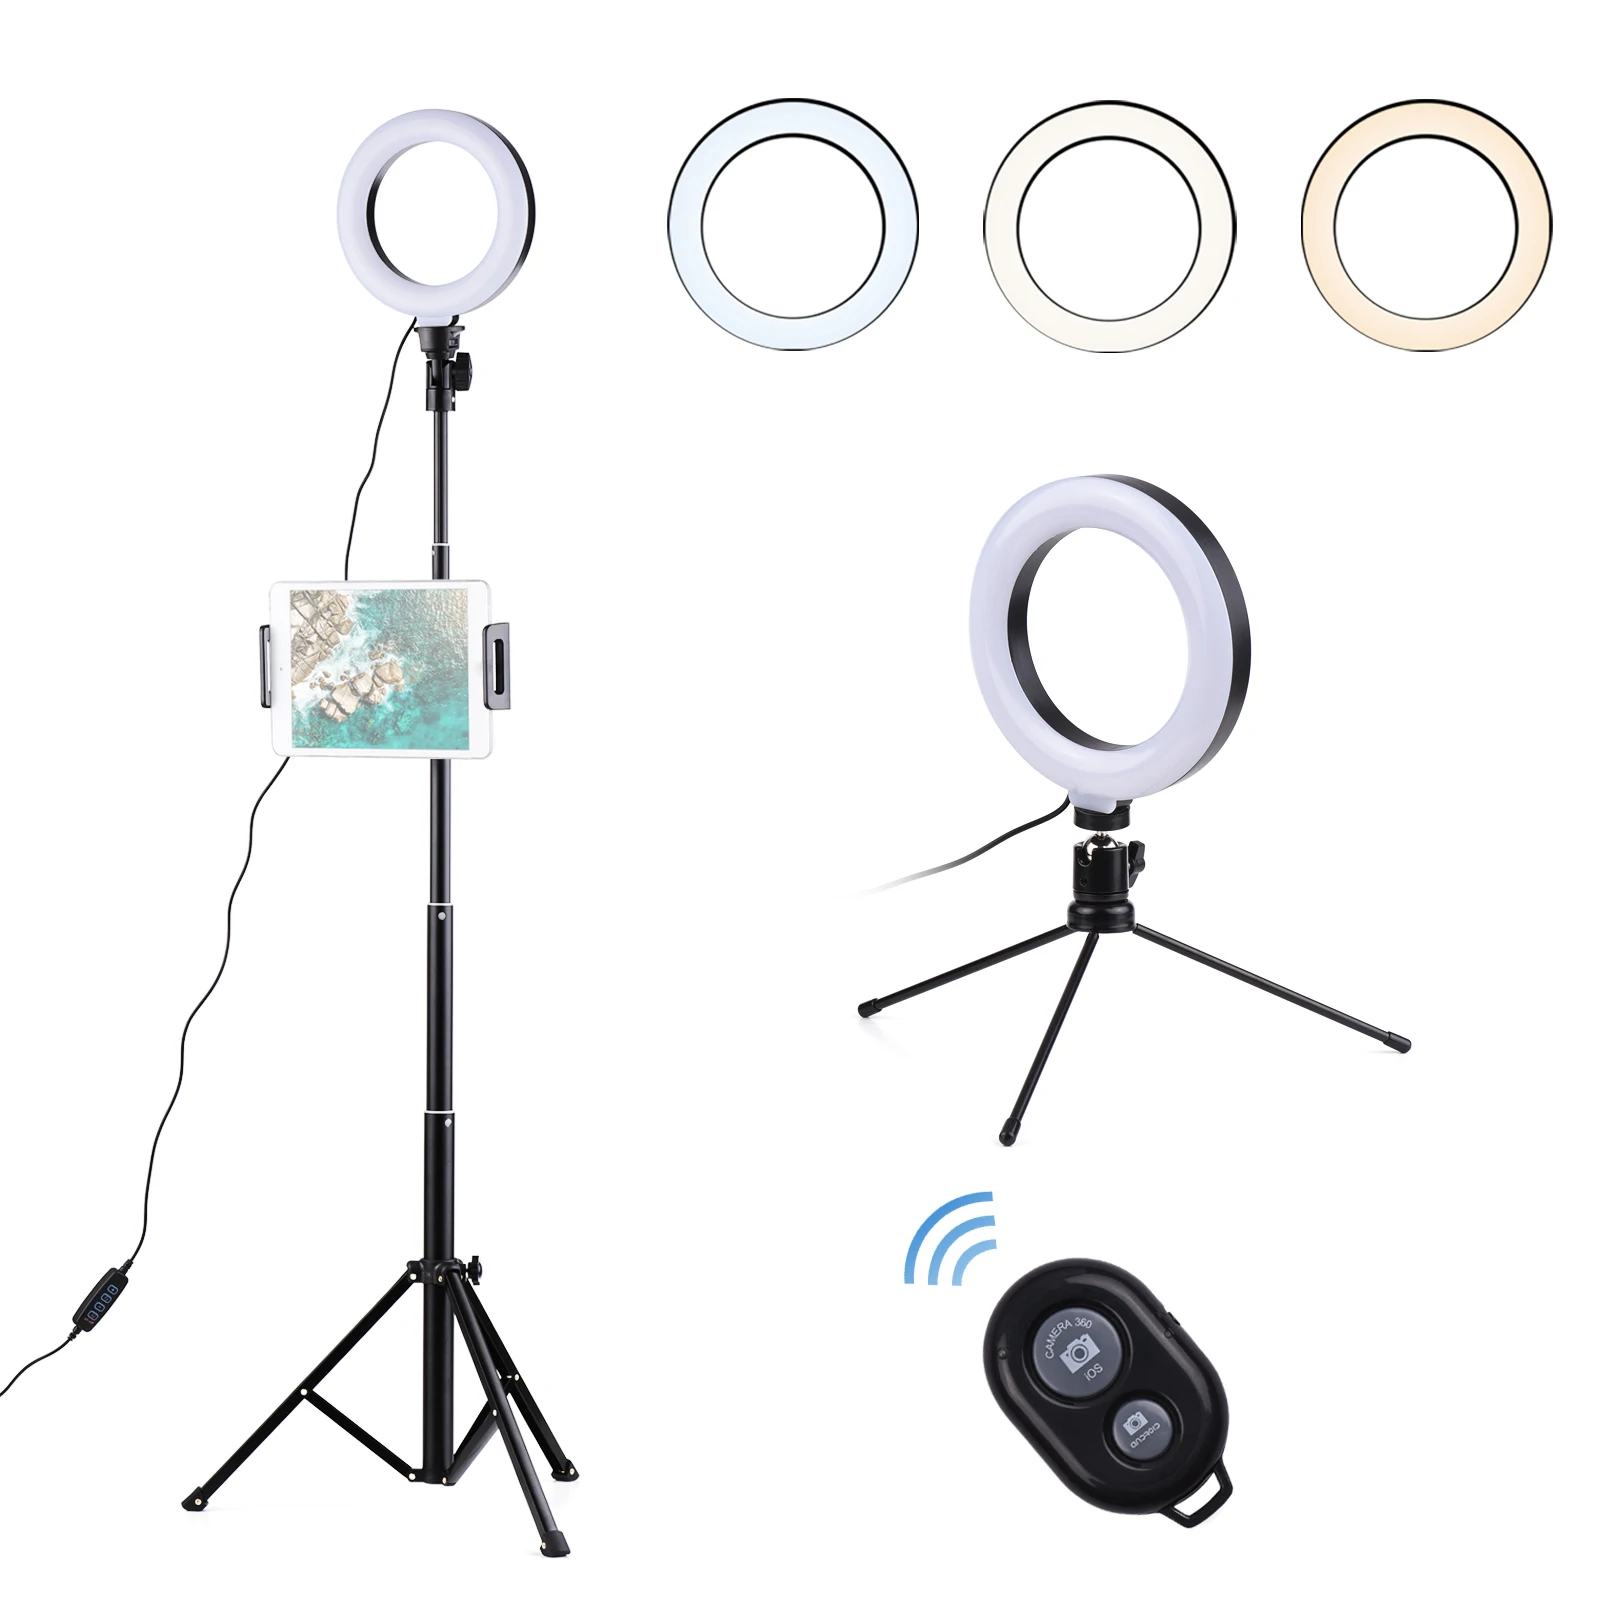 

6 Inch Selfie LED Ring Light 3 Modes 10 Brightness Levels with Tripod Stand Phone Holder Remote Control for Live LED Ring Light